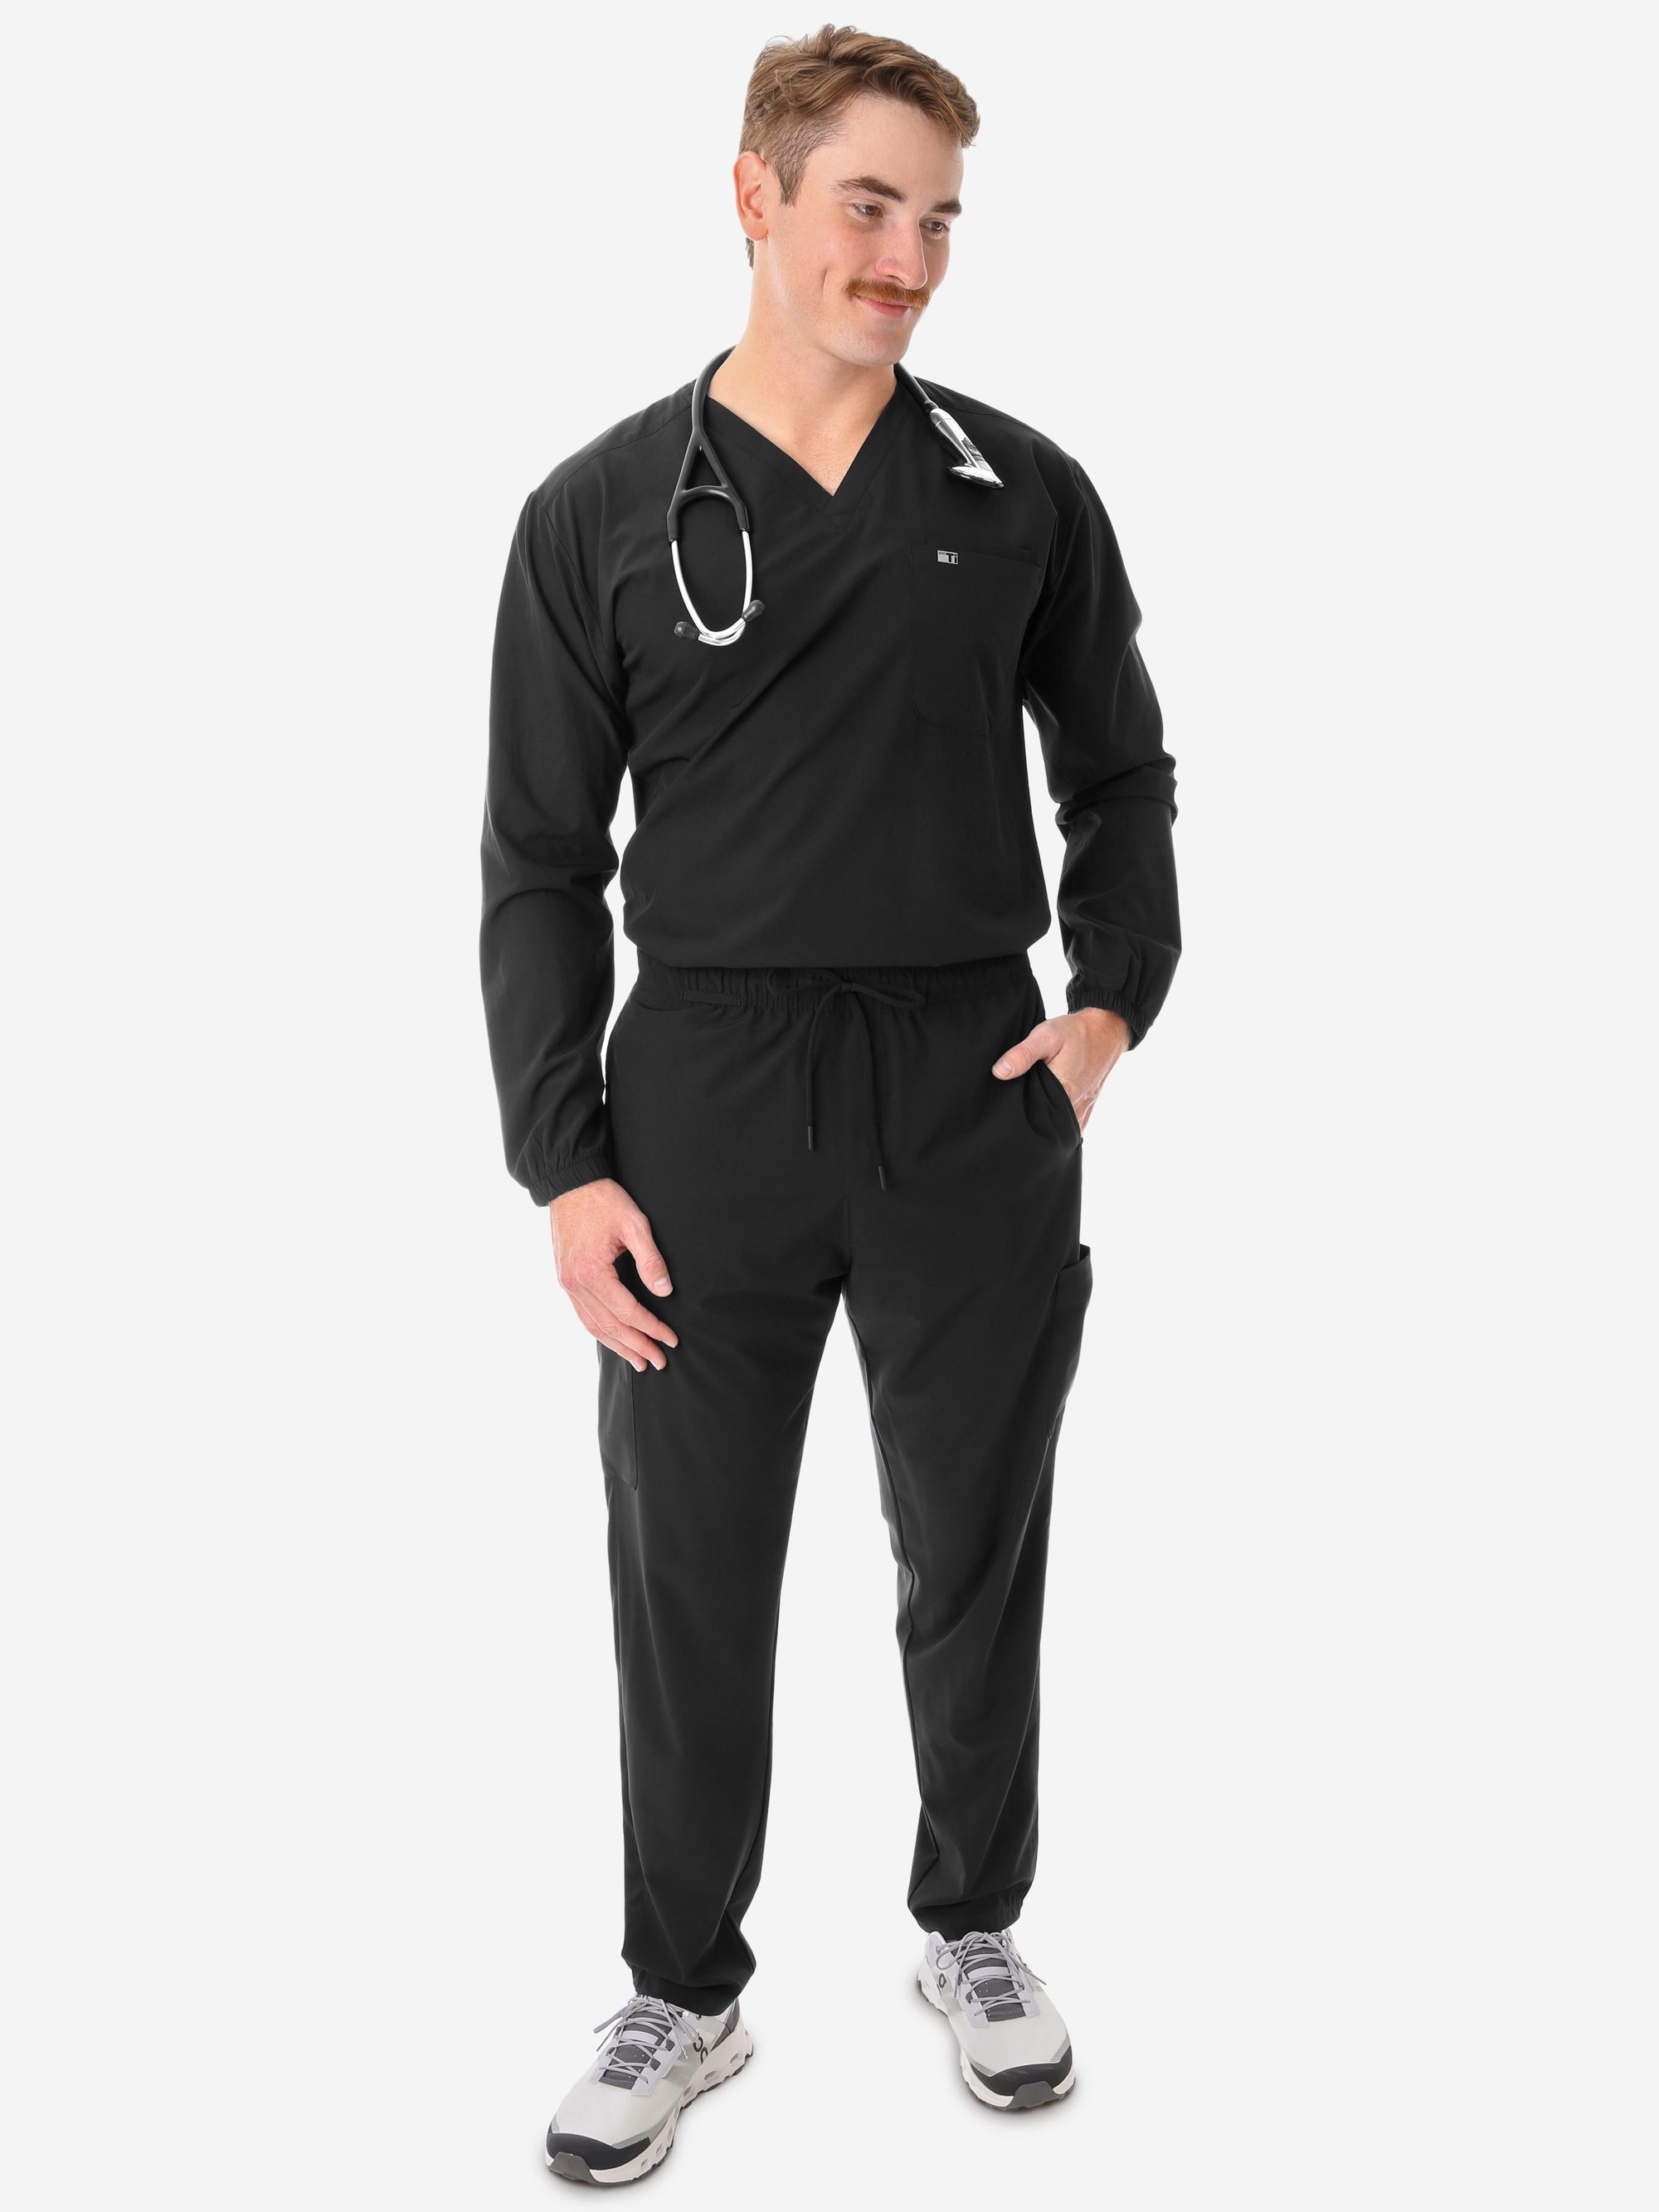 Men&#39;s Long Sleeve Scrub Top with Two Chest Pockets Real Black Full Body Front View with Stethoscope